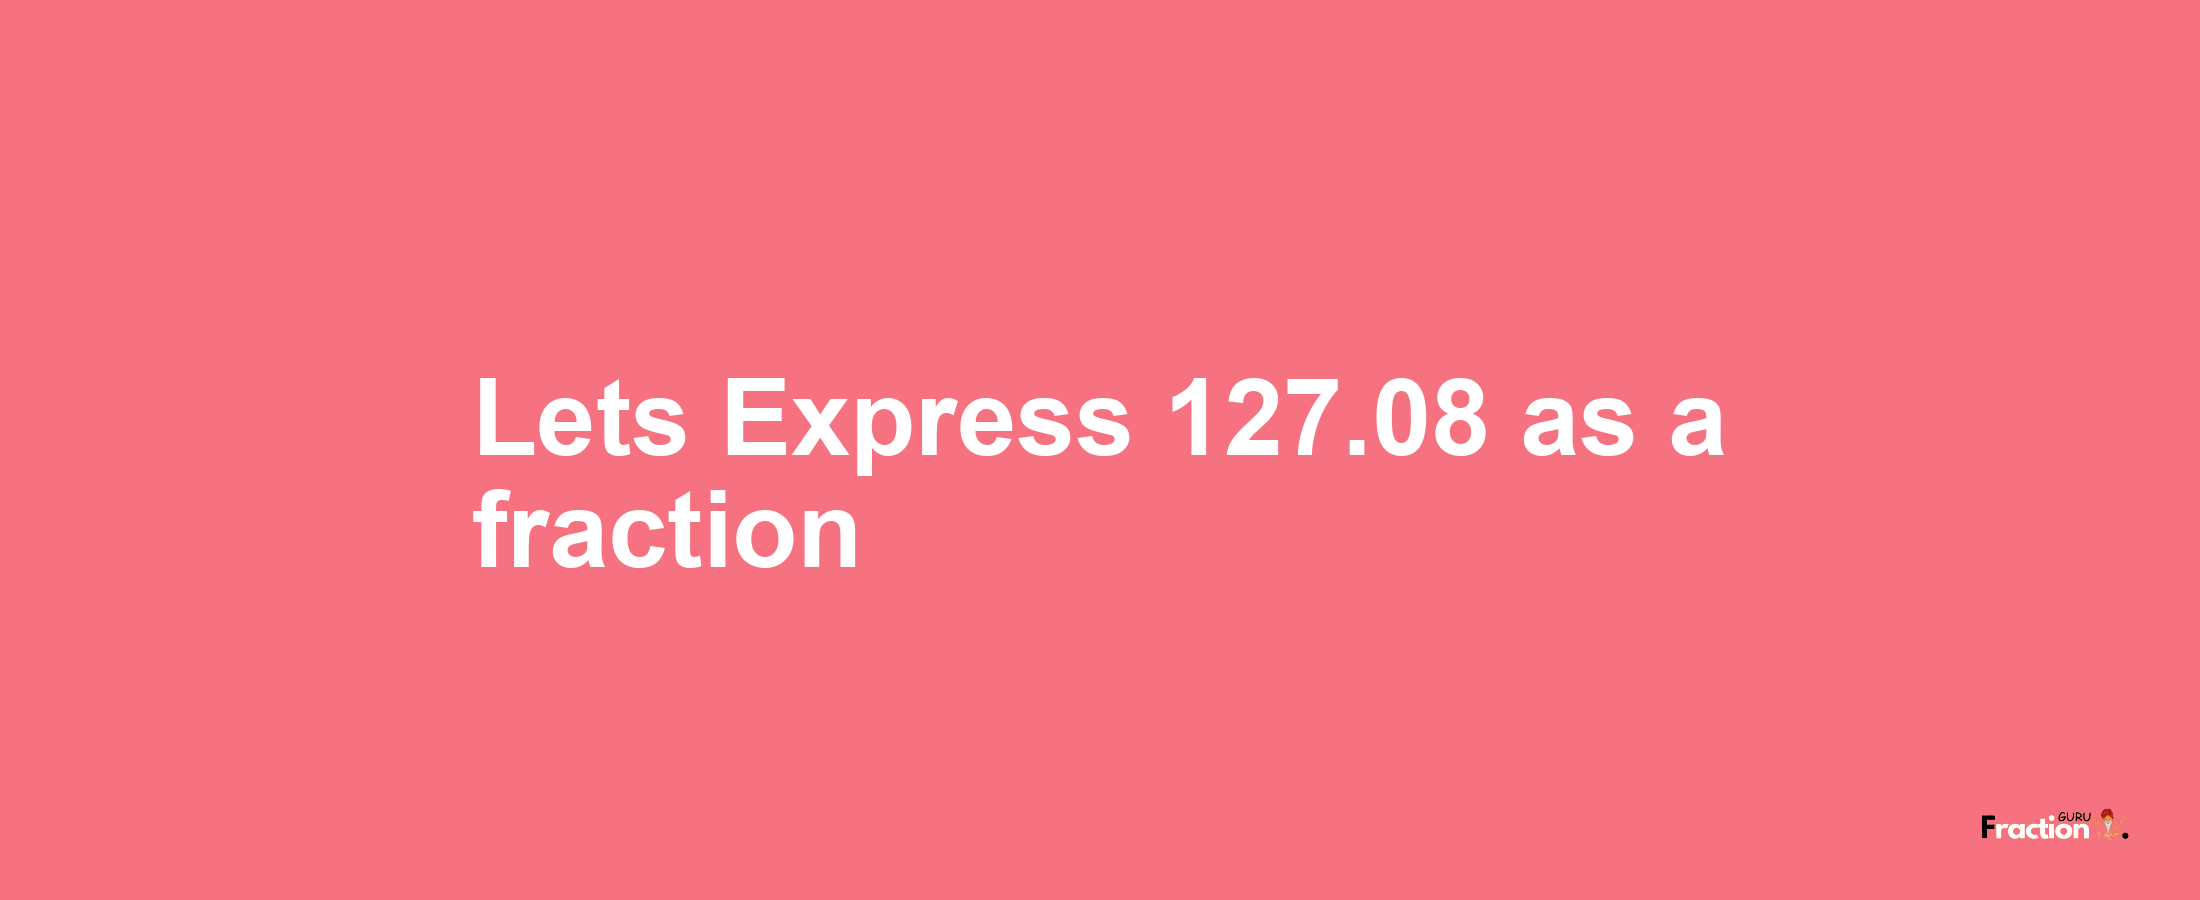 Lets Express 127.08 as afraction